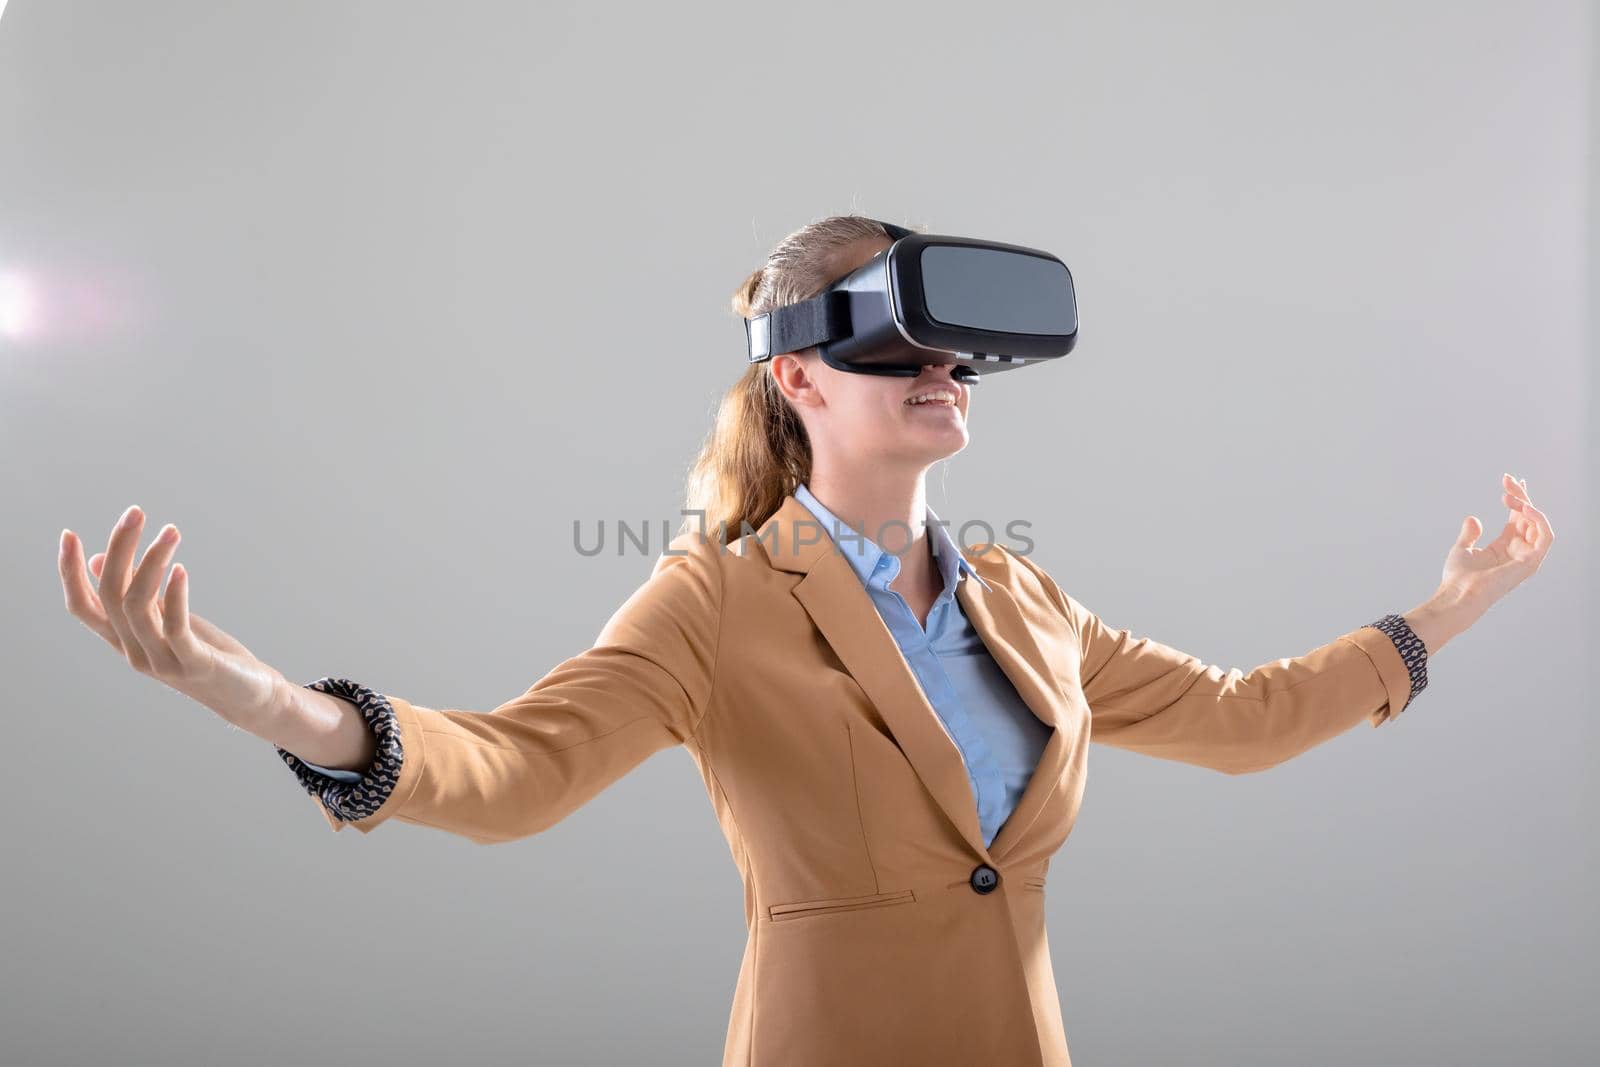 Caucasian businesswoman wearing vr headset widening her arms, isolated on grey background. business, technology, communication and growth concept.